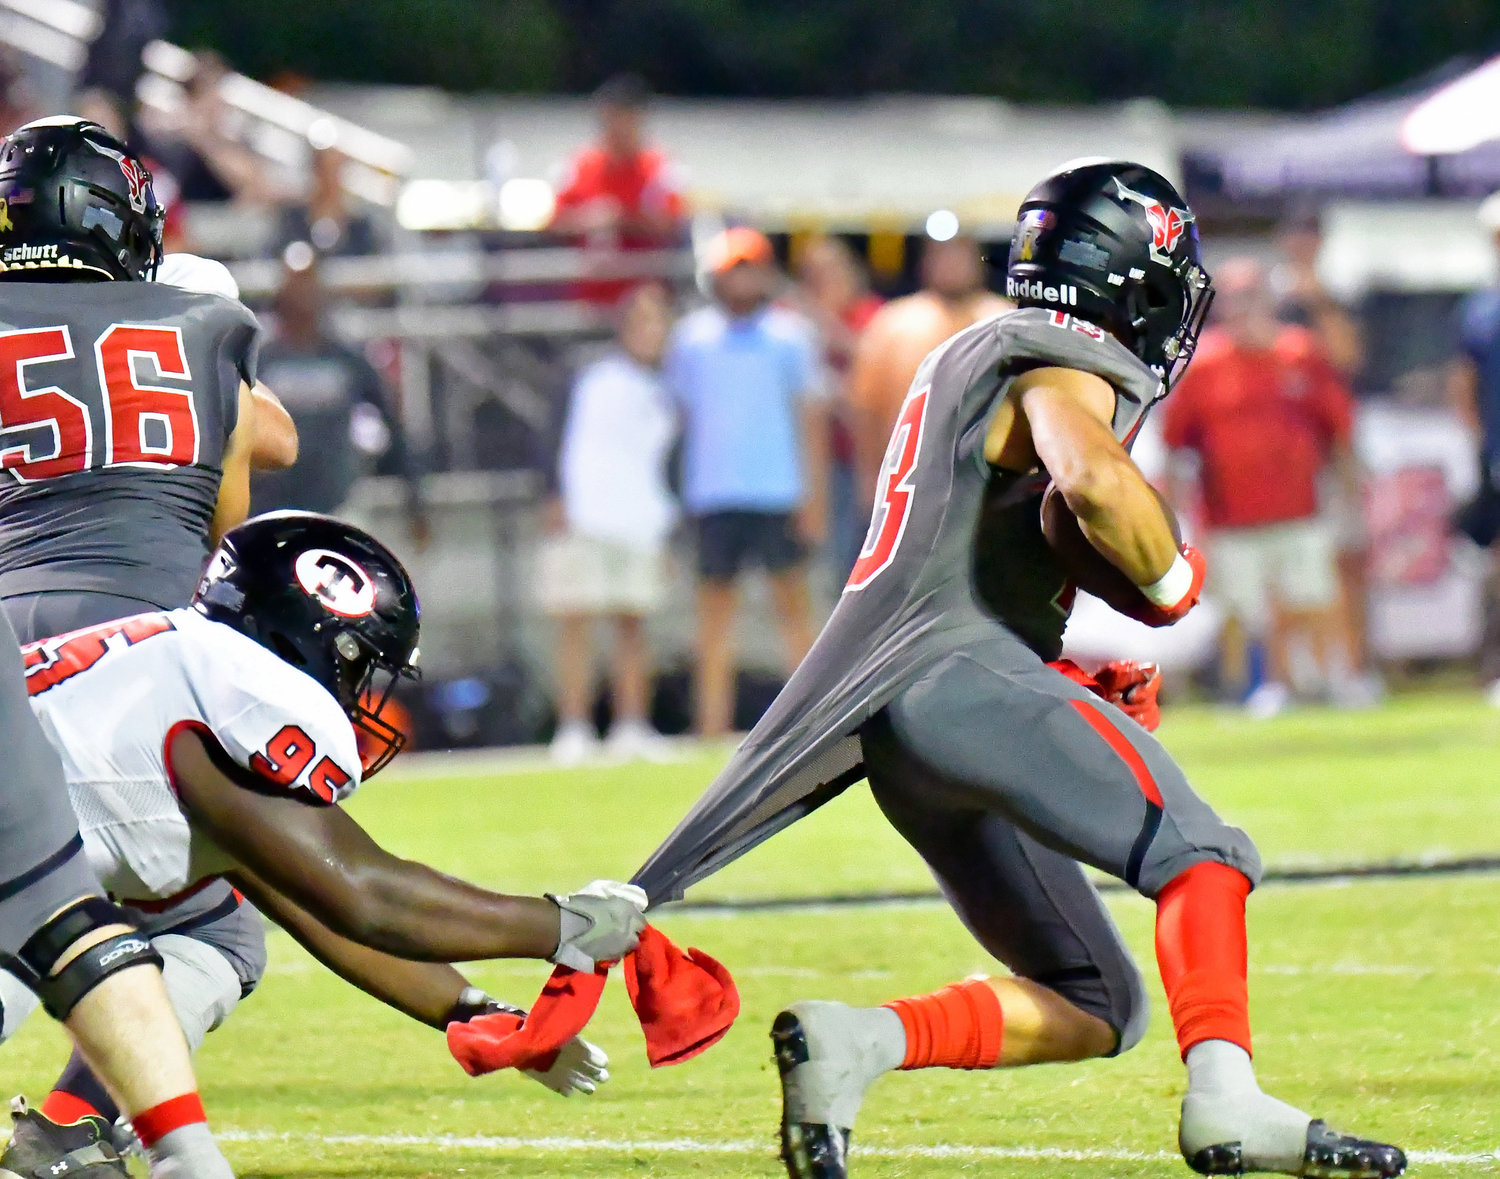 Spanish Fort running back Sawyer Wilson looks for running room while Theodore defensive lineman Jordan Bolden tugs on his jersey during the region game between the Toros and Bobcats Friday night, Sept. 16, in Spanish Fort.